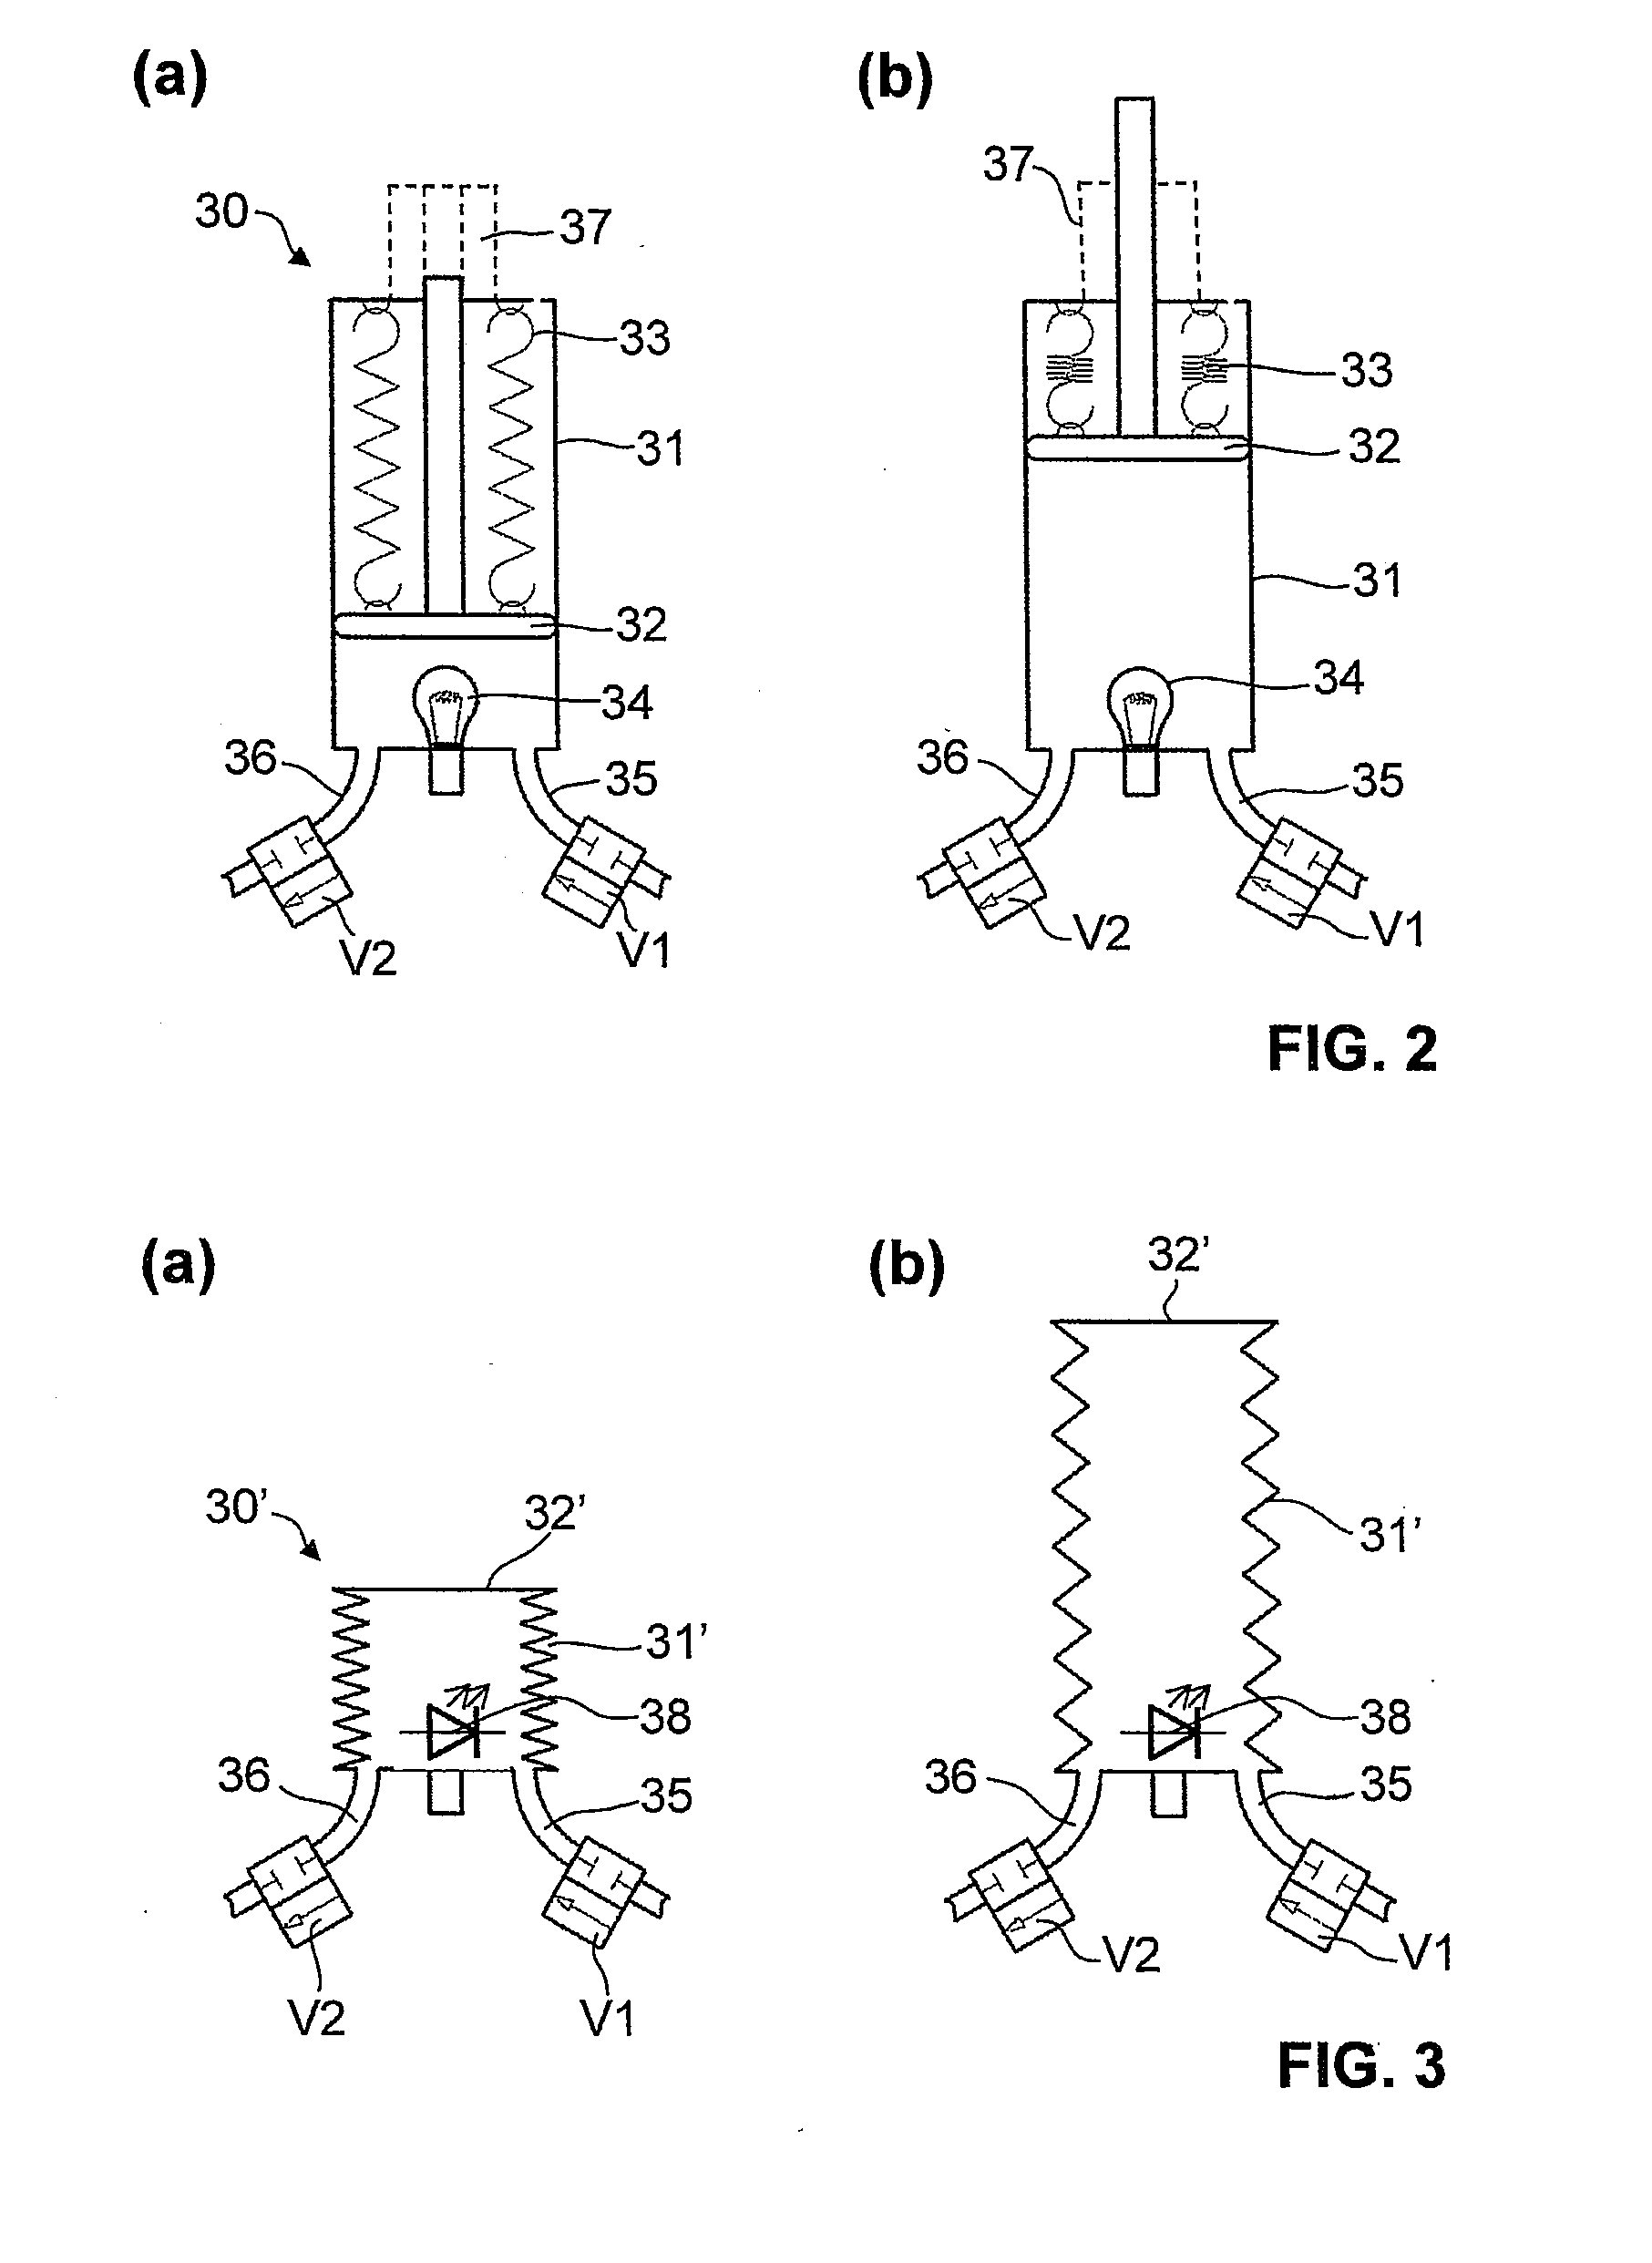 Suction Apparatus with a Flushable Drainage Line